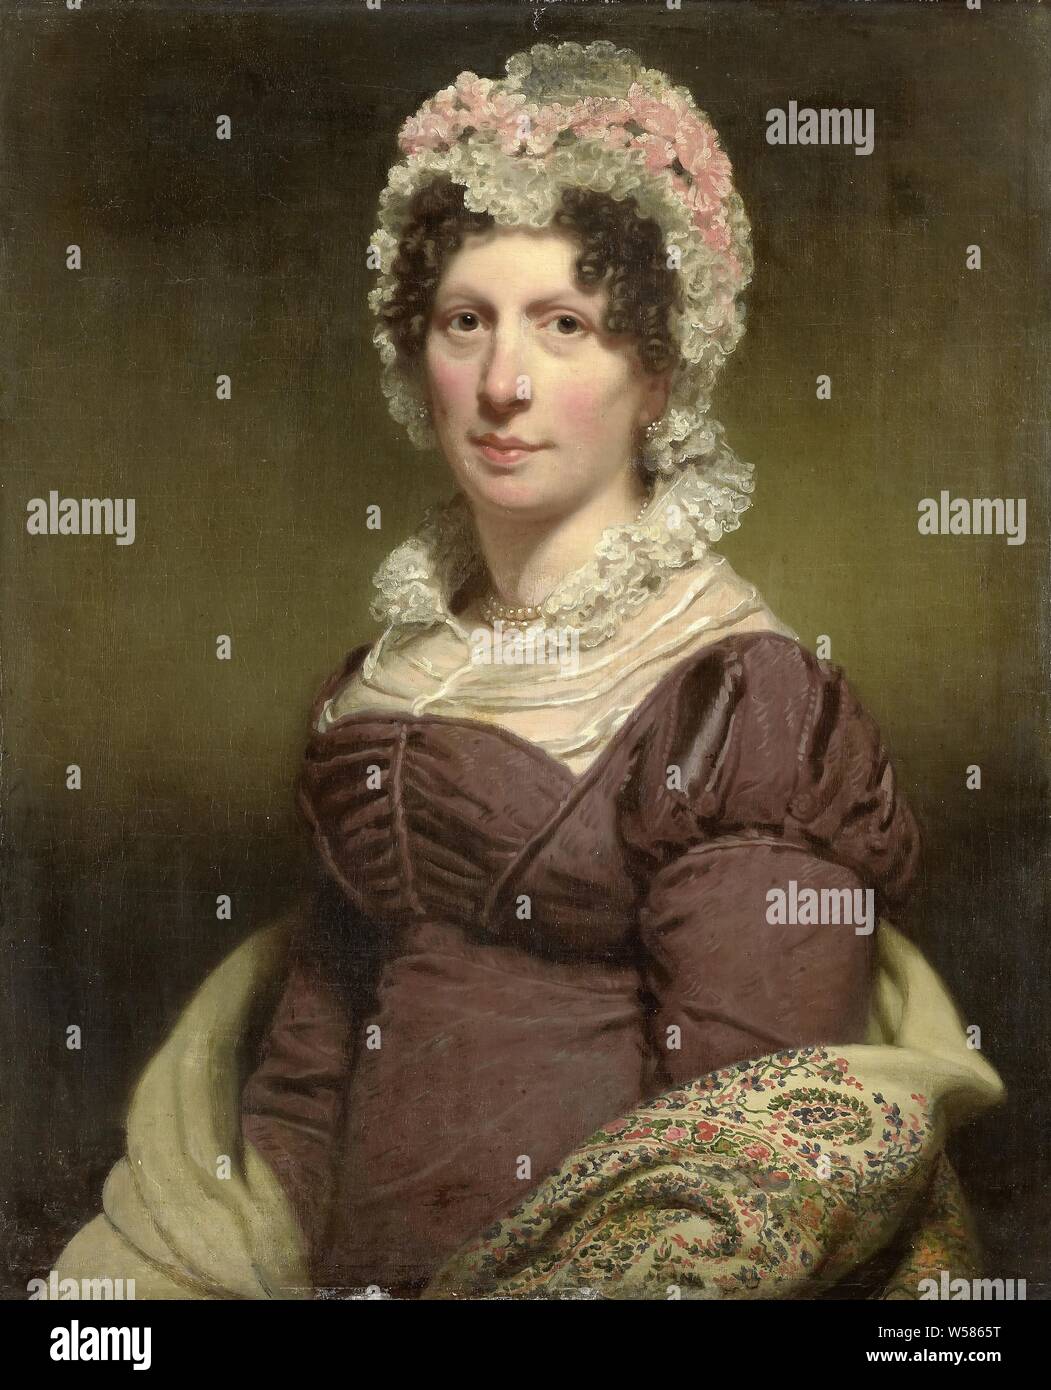 Portrait of a Woman, Portrait of an Unknown Woman, Perhaps the Wife of J.W. Beynen. historical persons not known by name - BB - woman, Charles Howard Hodges, c. 1790 - c. 1820, canvas, oil paint (paint), h 73 cm × w 60 cm d 10.4 cm Stock Photo